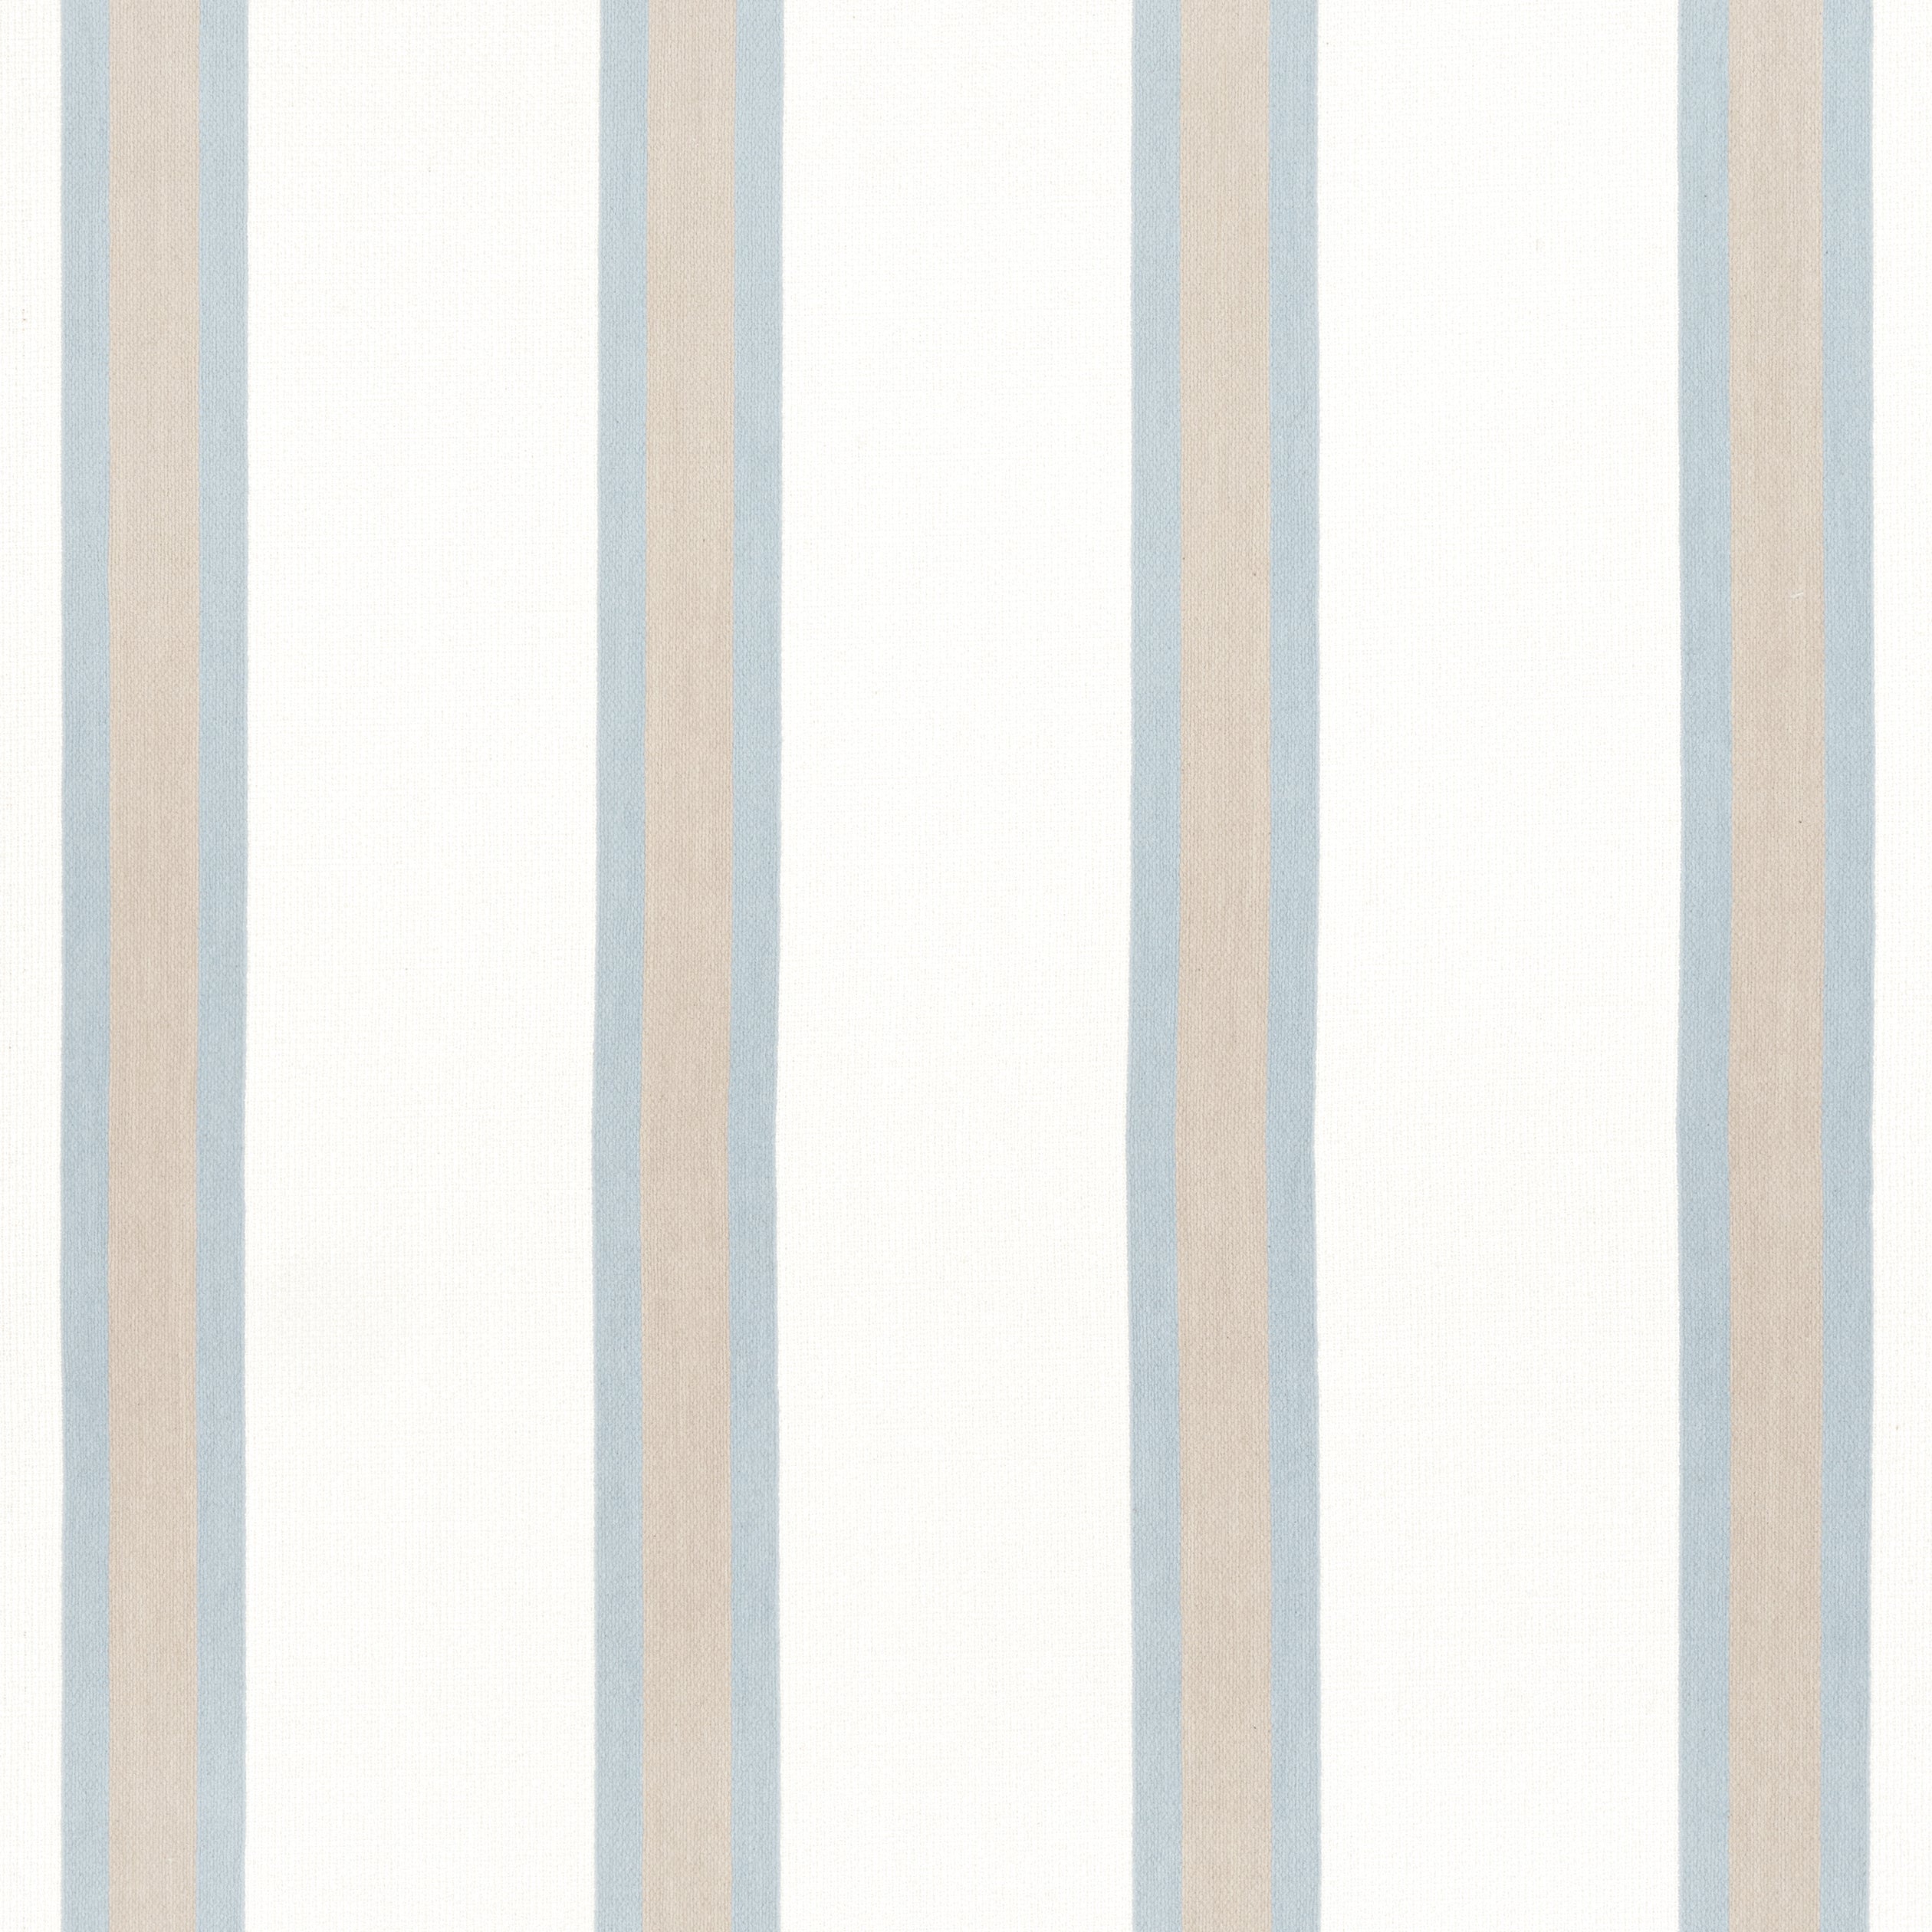 Abito Stripe fabric in powder color - pattern number W77145 - by Thibaut in the Veneto collection